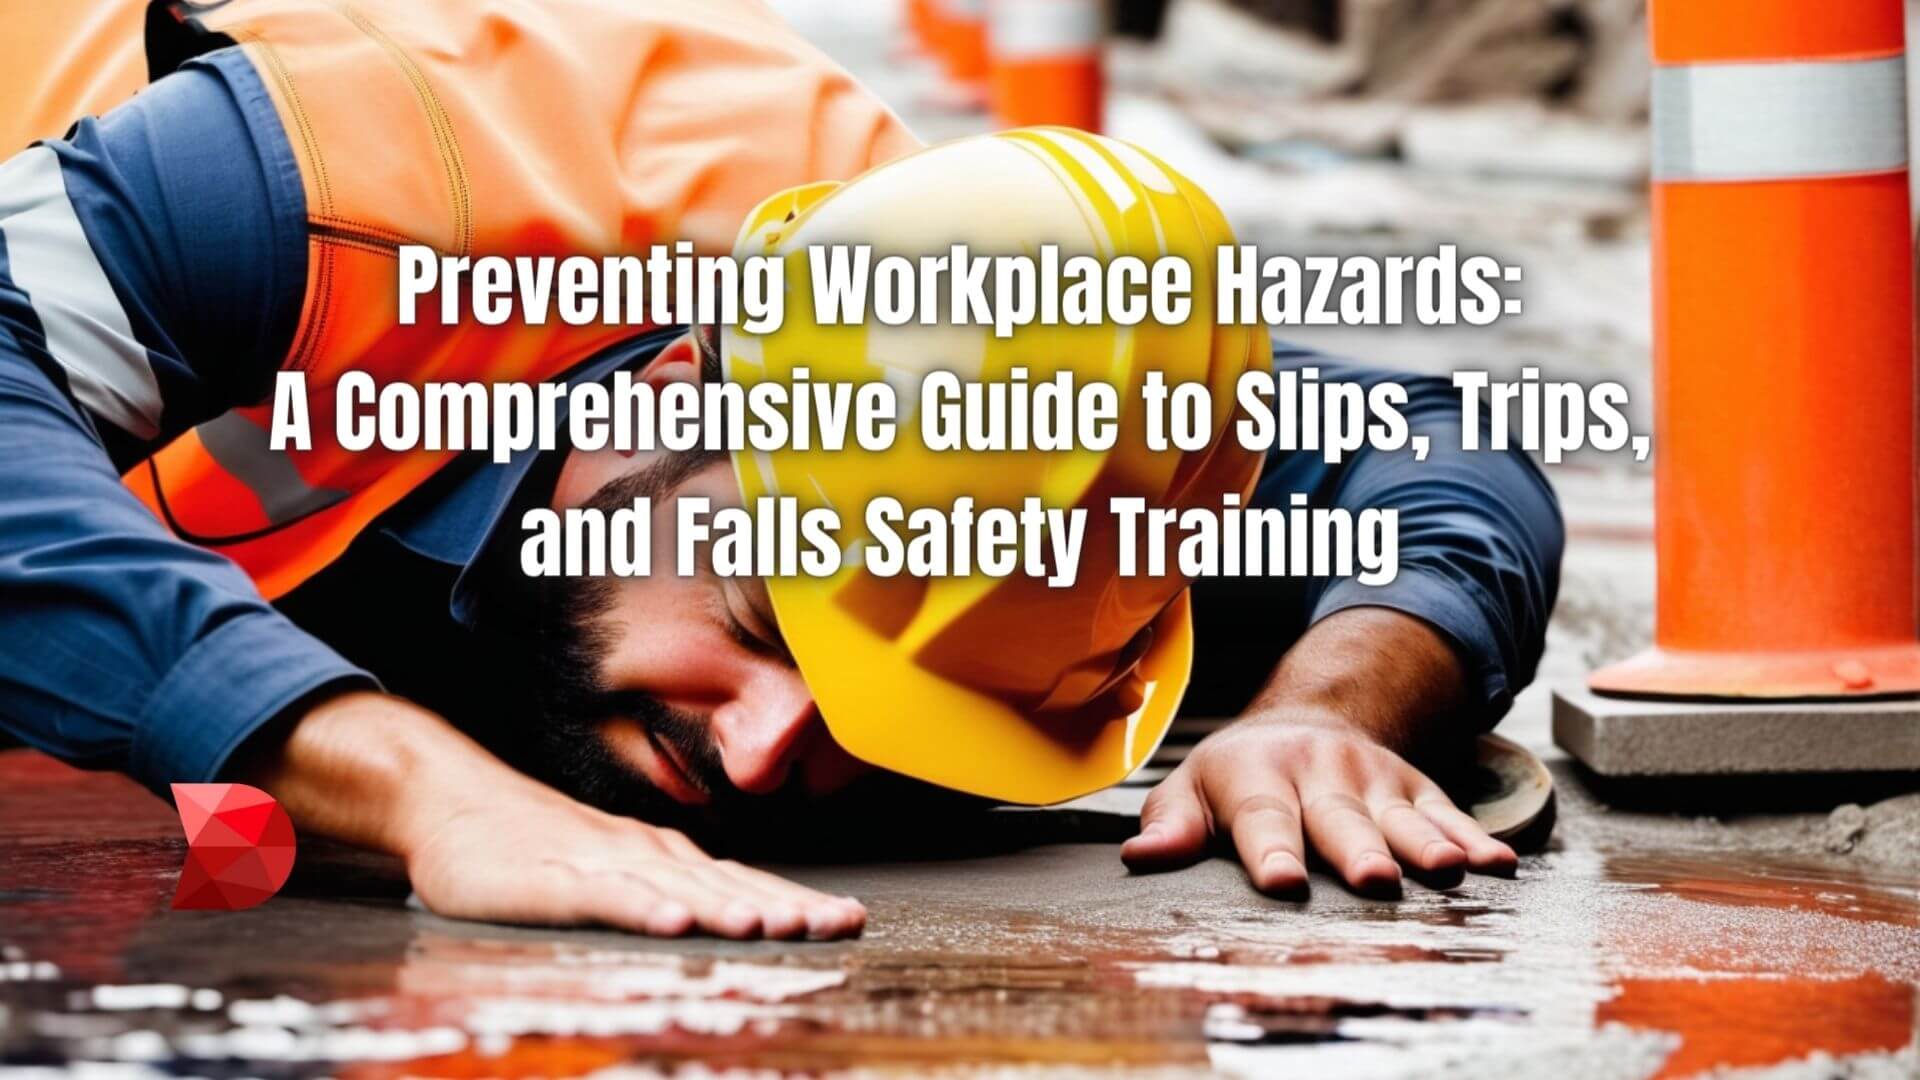 Ensure workplace safety with this guide to slips, trips, and fall training. Equip your team with essential skills for injury prevention now!